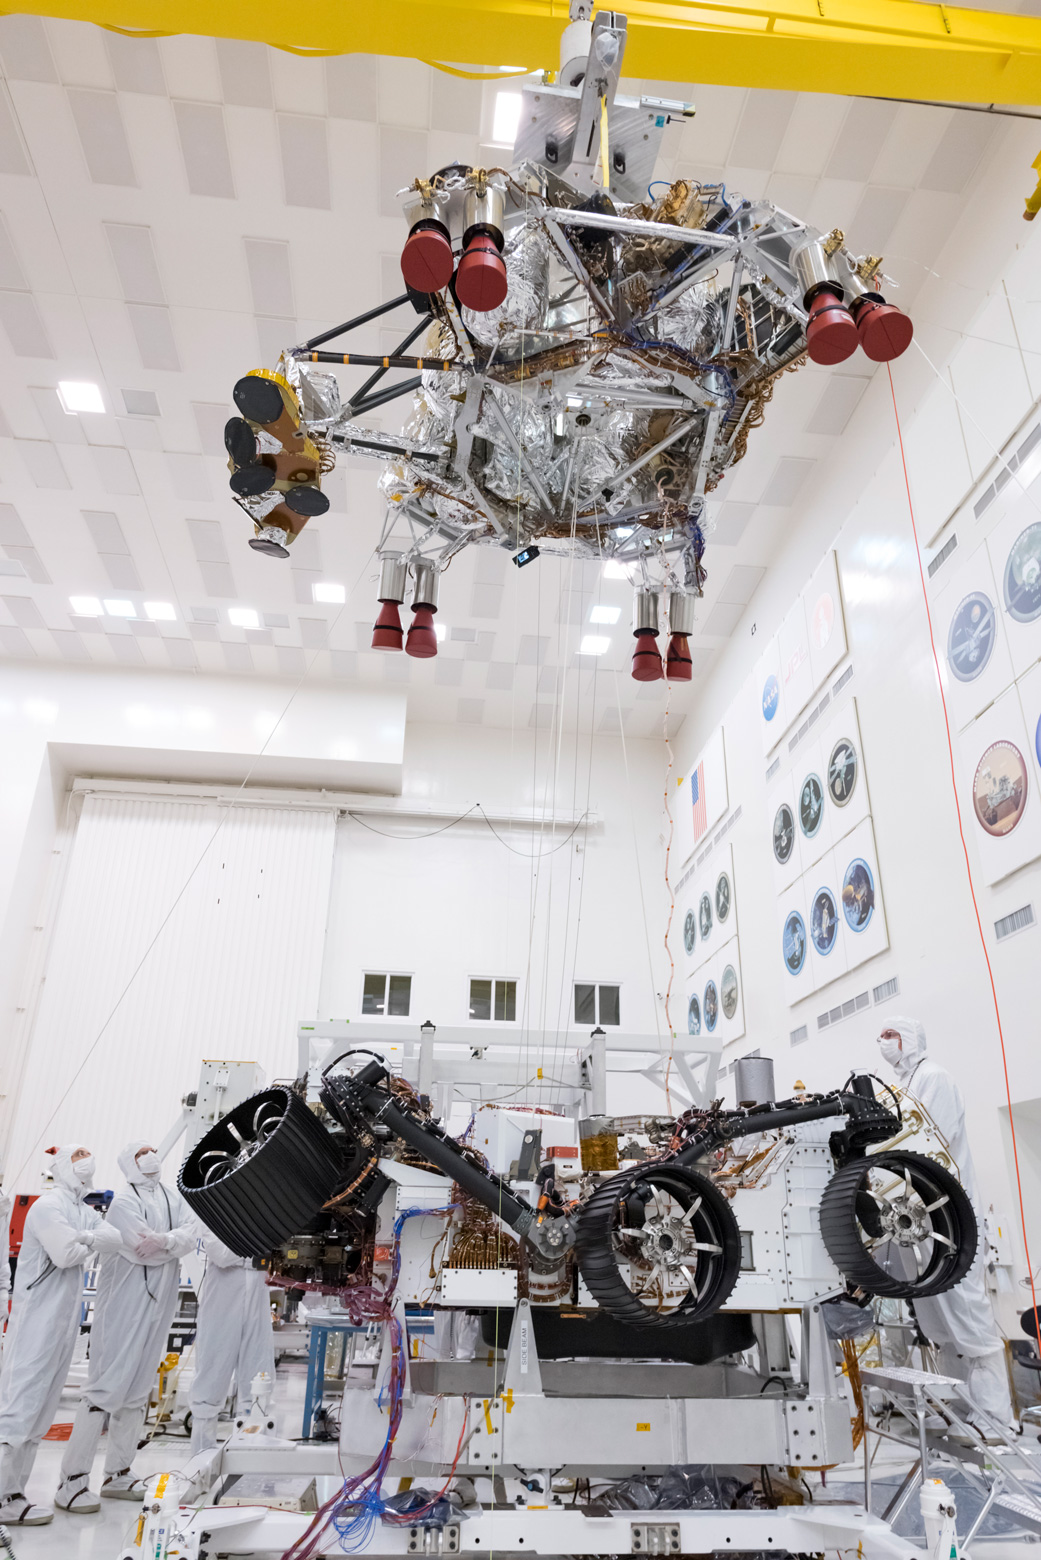 On Sept. 28, 2019, engineers and technicians working on the Mars 2020 spacecraft at NASA's Jet Propulsion Laboratory in Pasadena, California, look on as a crane lifts the rocket-powered descent stage away from the rover after a test.